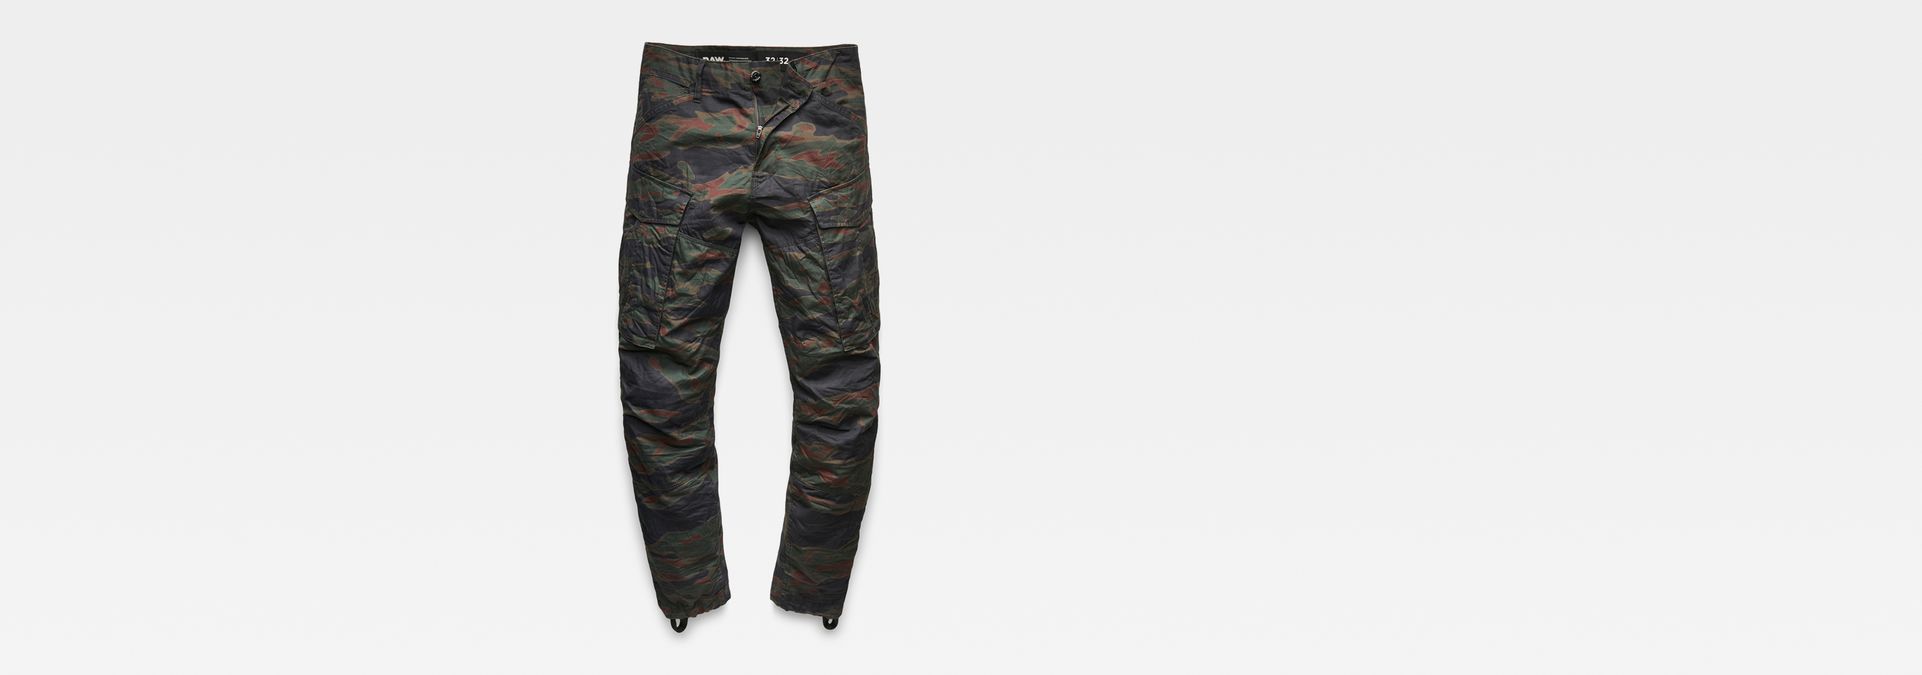 rovic pm 3d tapered pants